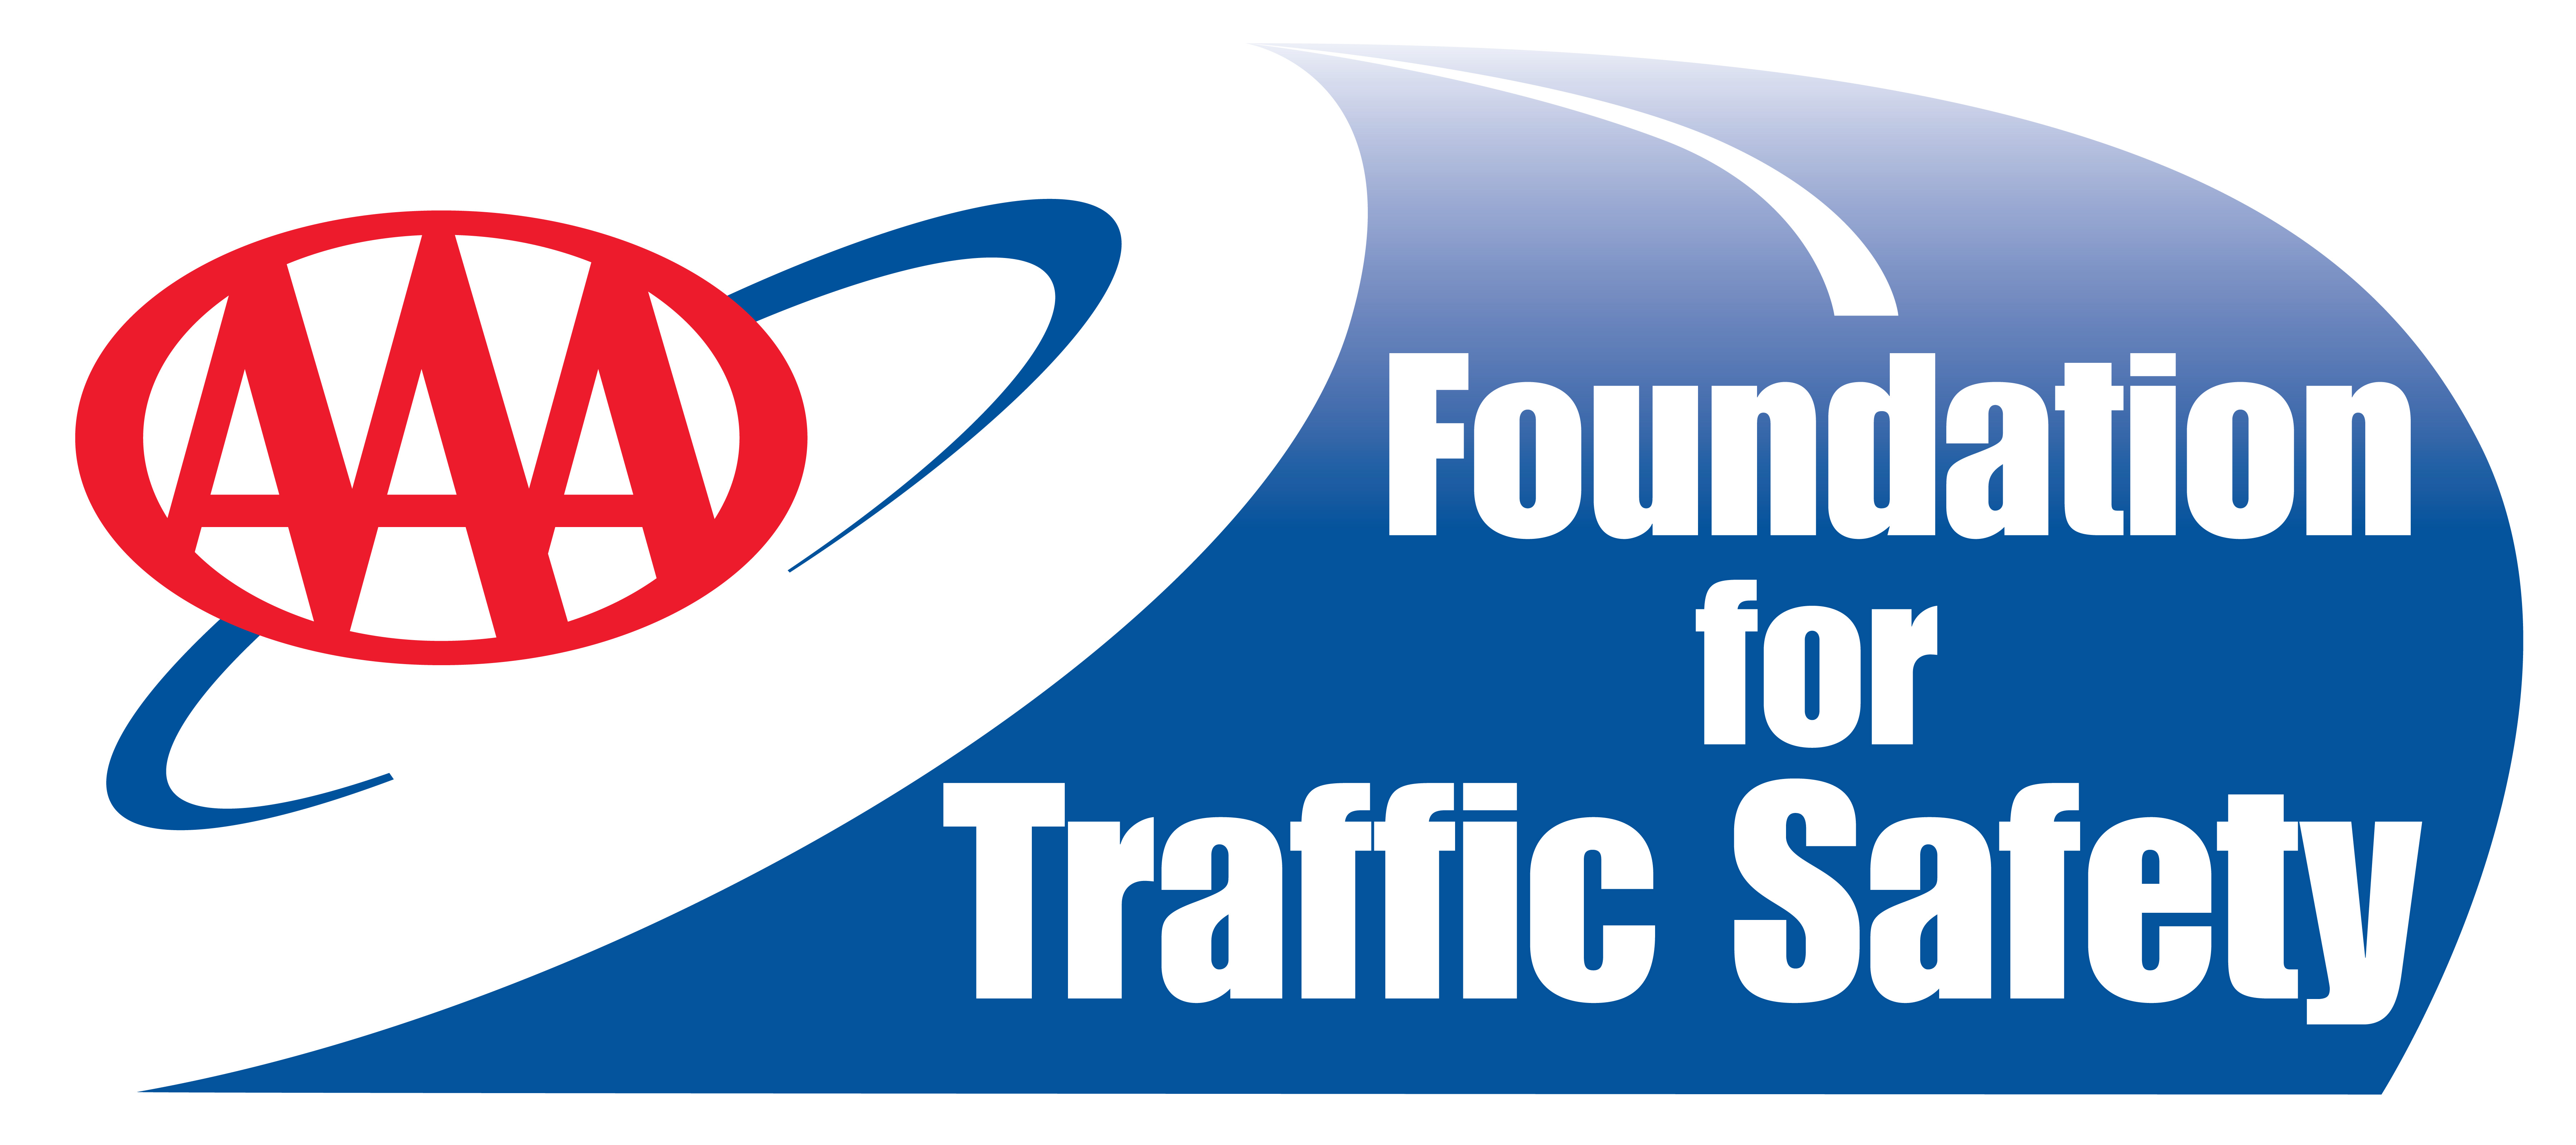 logo AAA Foundation for Traffic Safety